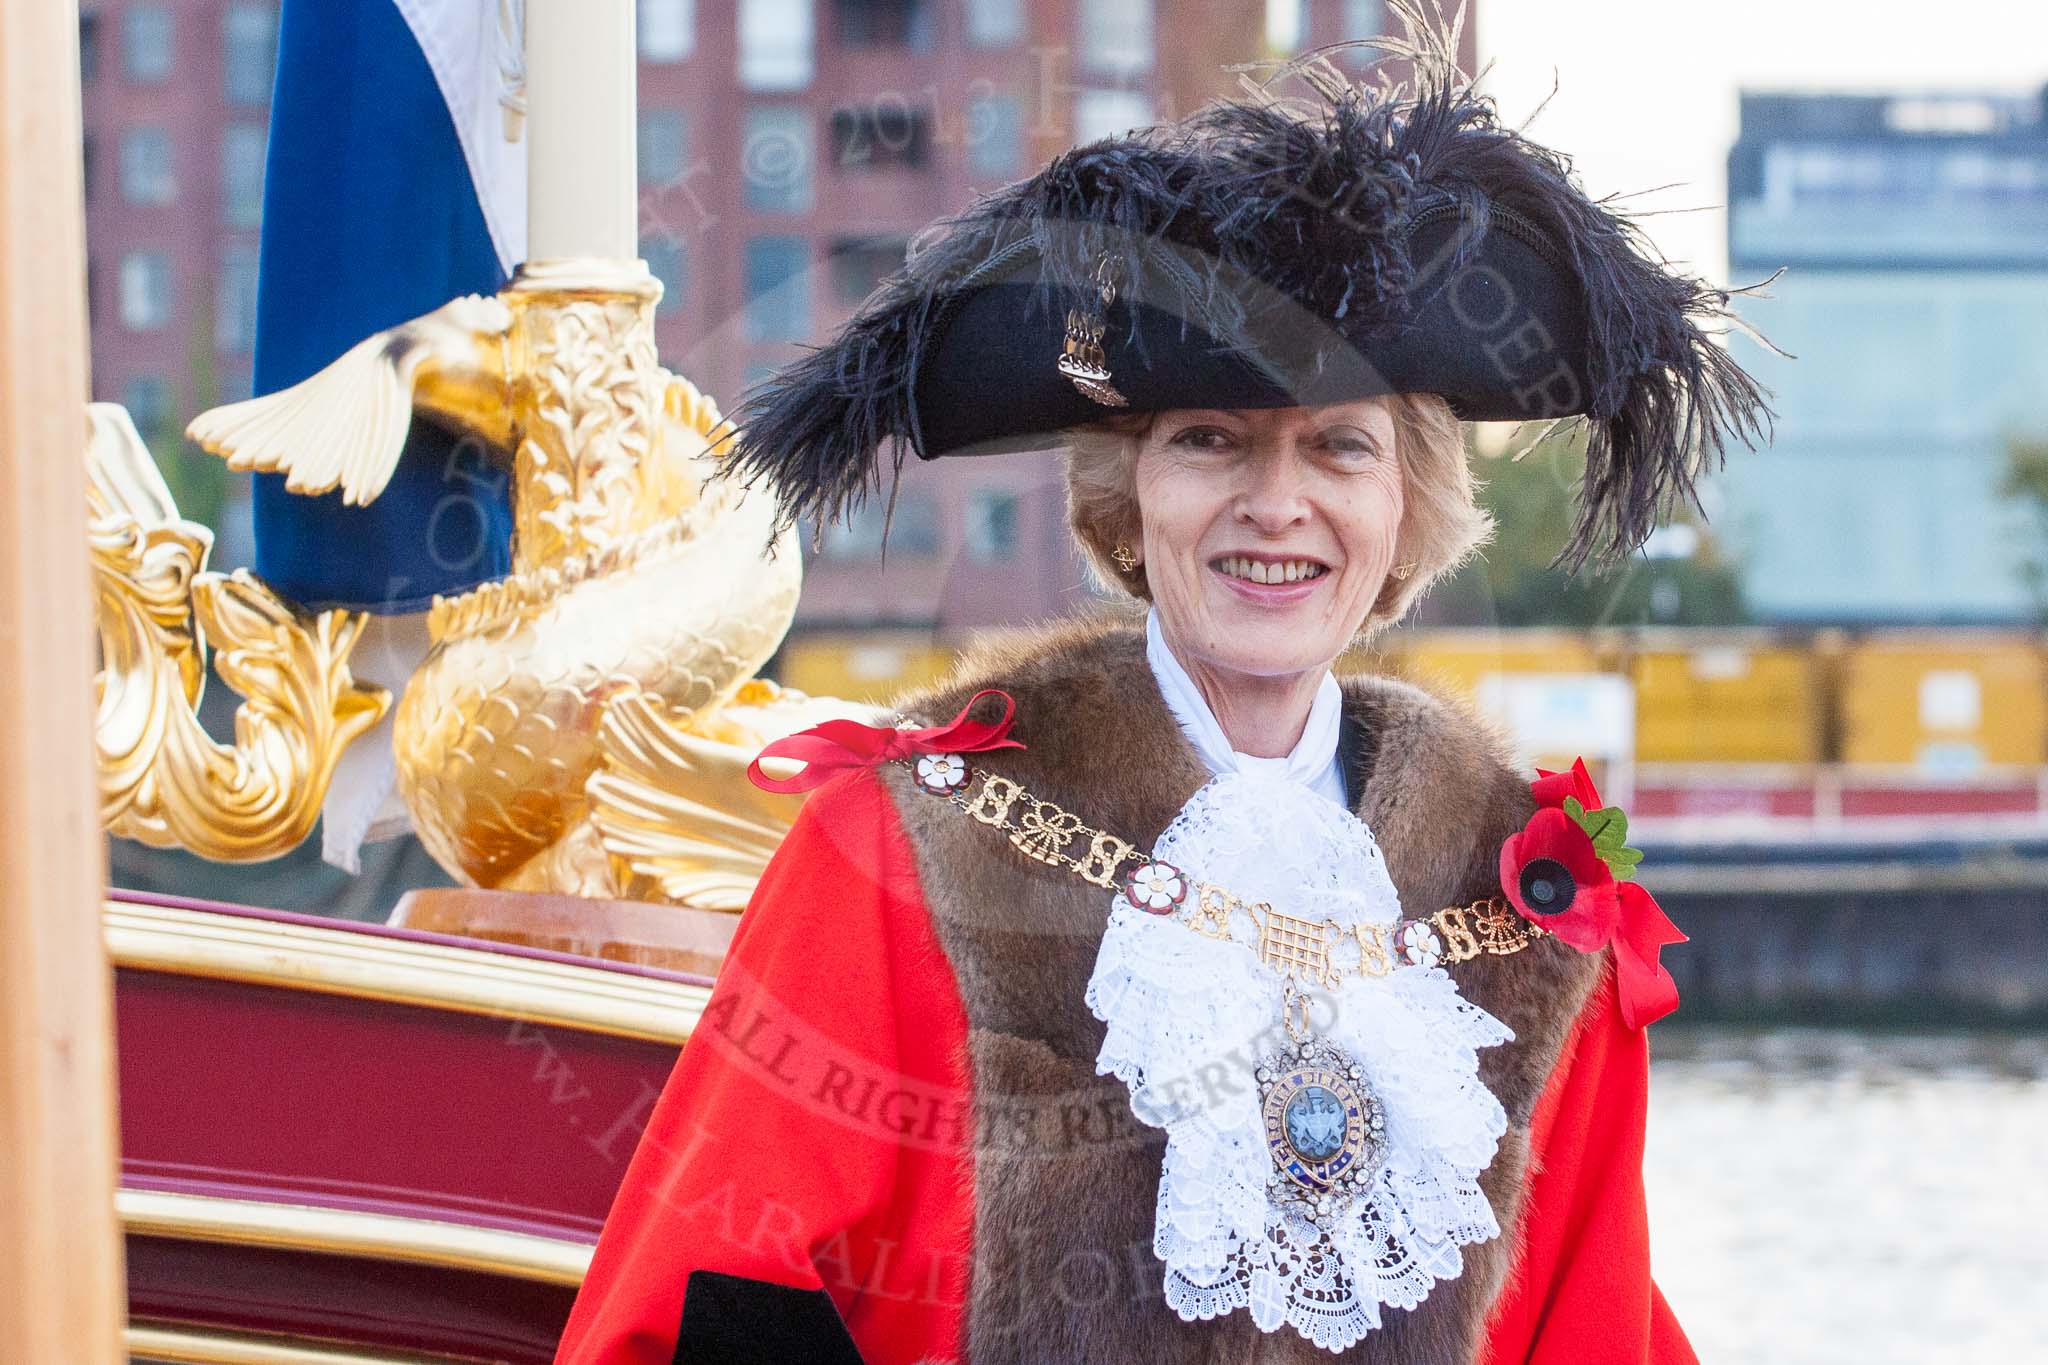 Lord Mayor's Show 2013: The Lord Mayor and Admiral of the Port of London, Alderman Fiona Woolf, on board of The Queen's Row Barge Gloriana. Photo by Mike Garland..




on 09 November 2013 at 08:37, image #11